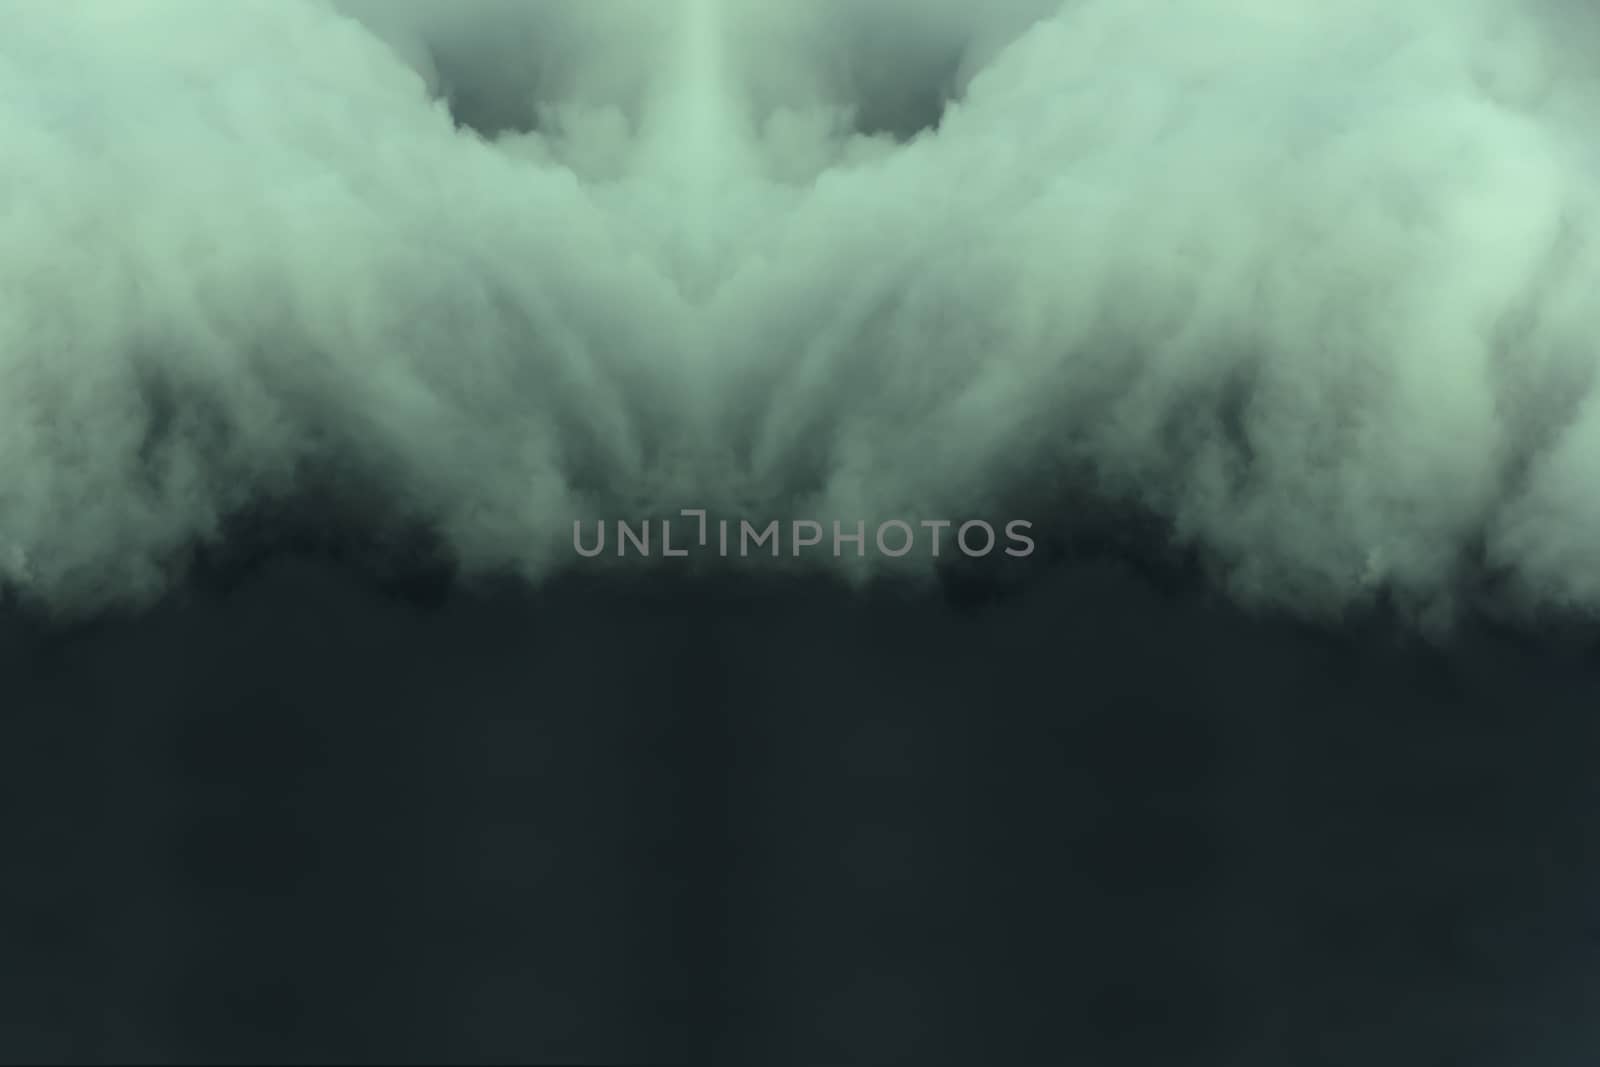 Thunderstorm sky background image by xfdly5